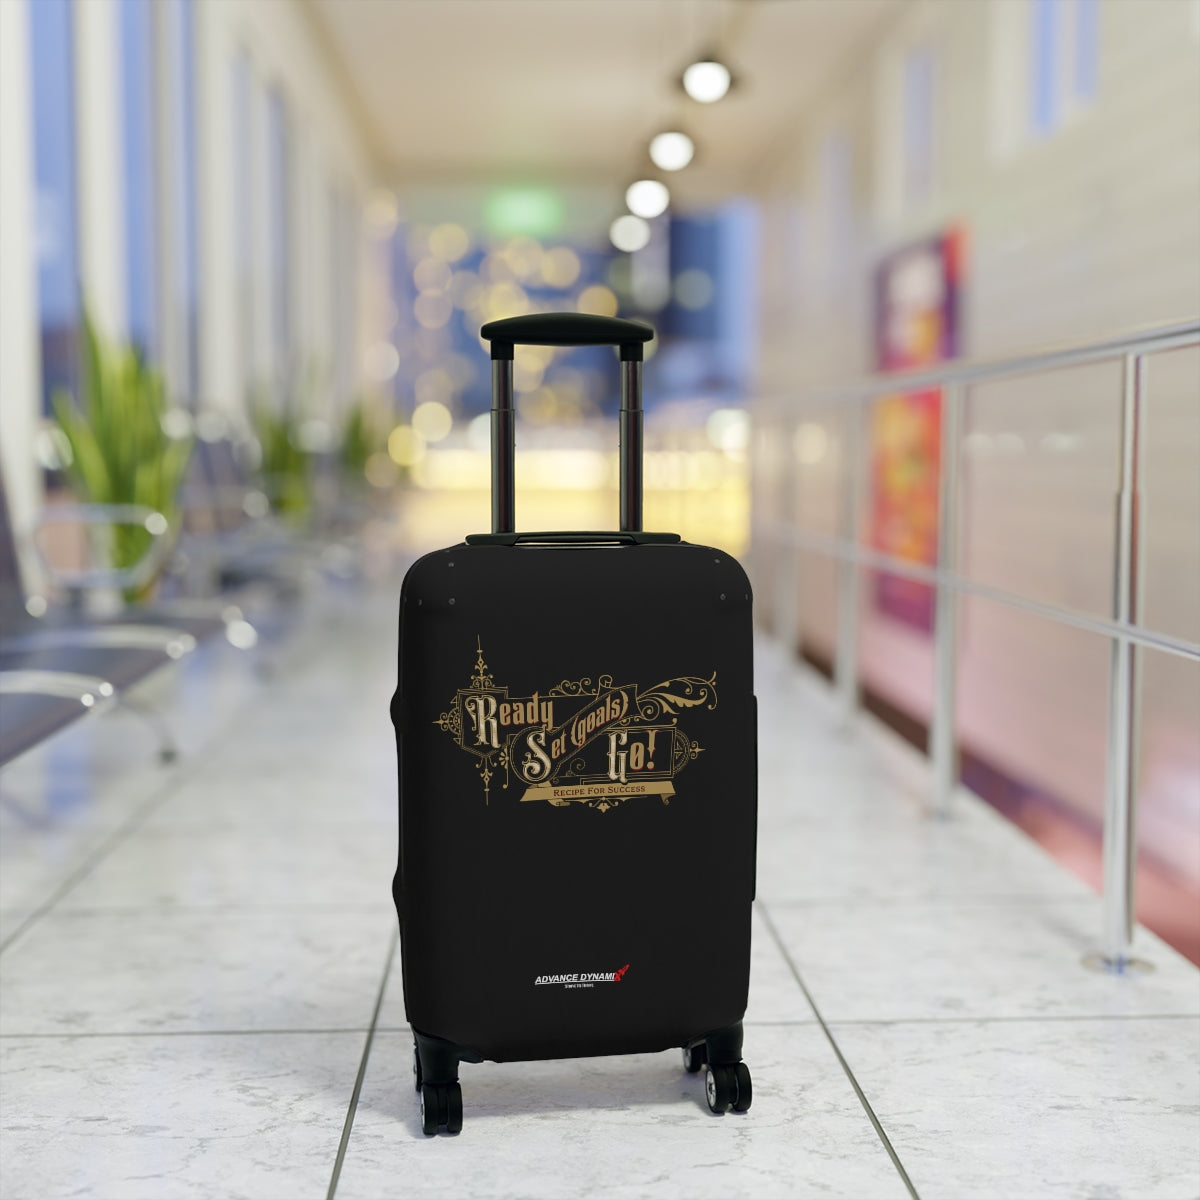 Ready, Set (goals), GO! - Luggage Covers Infused with Advance Dynamix Add-A-Tude - Tell the world!